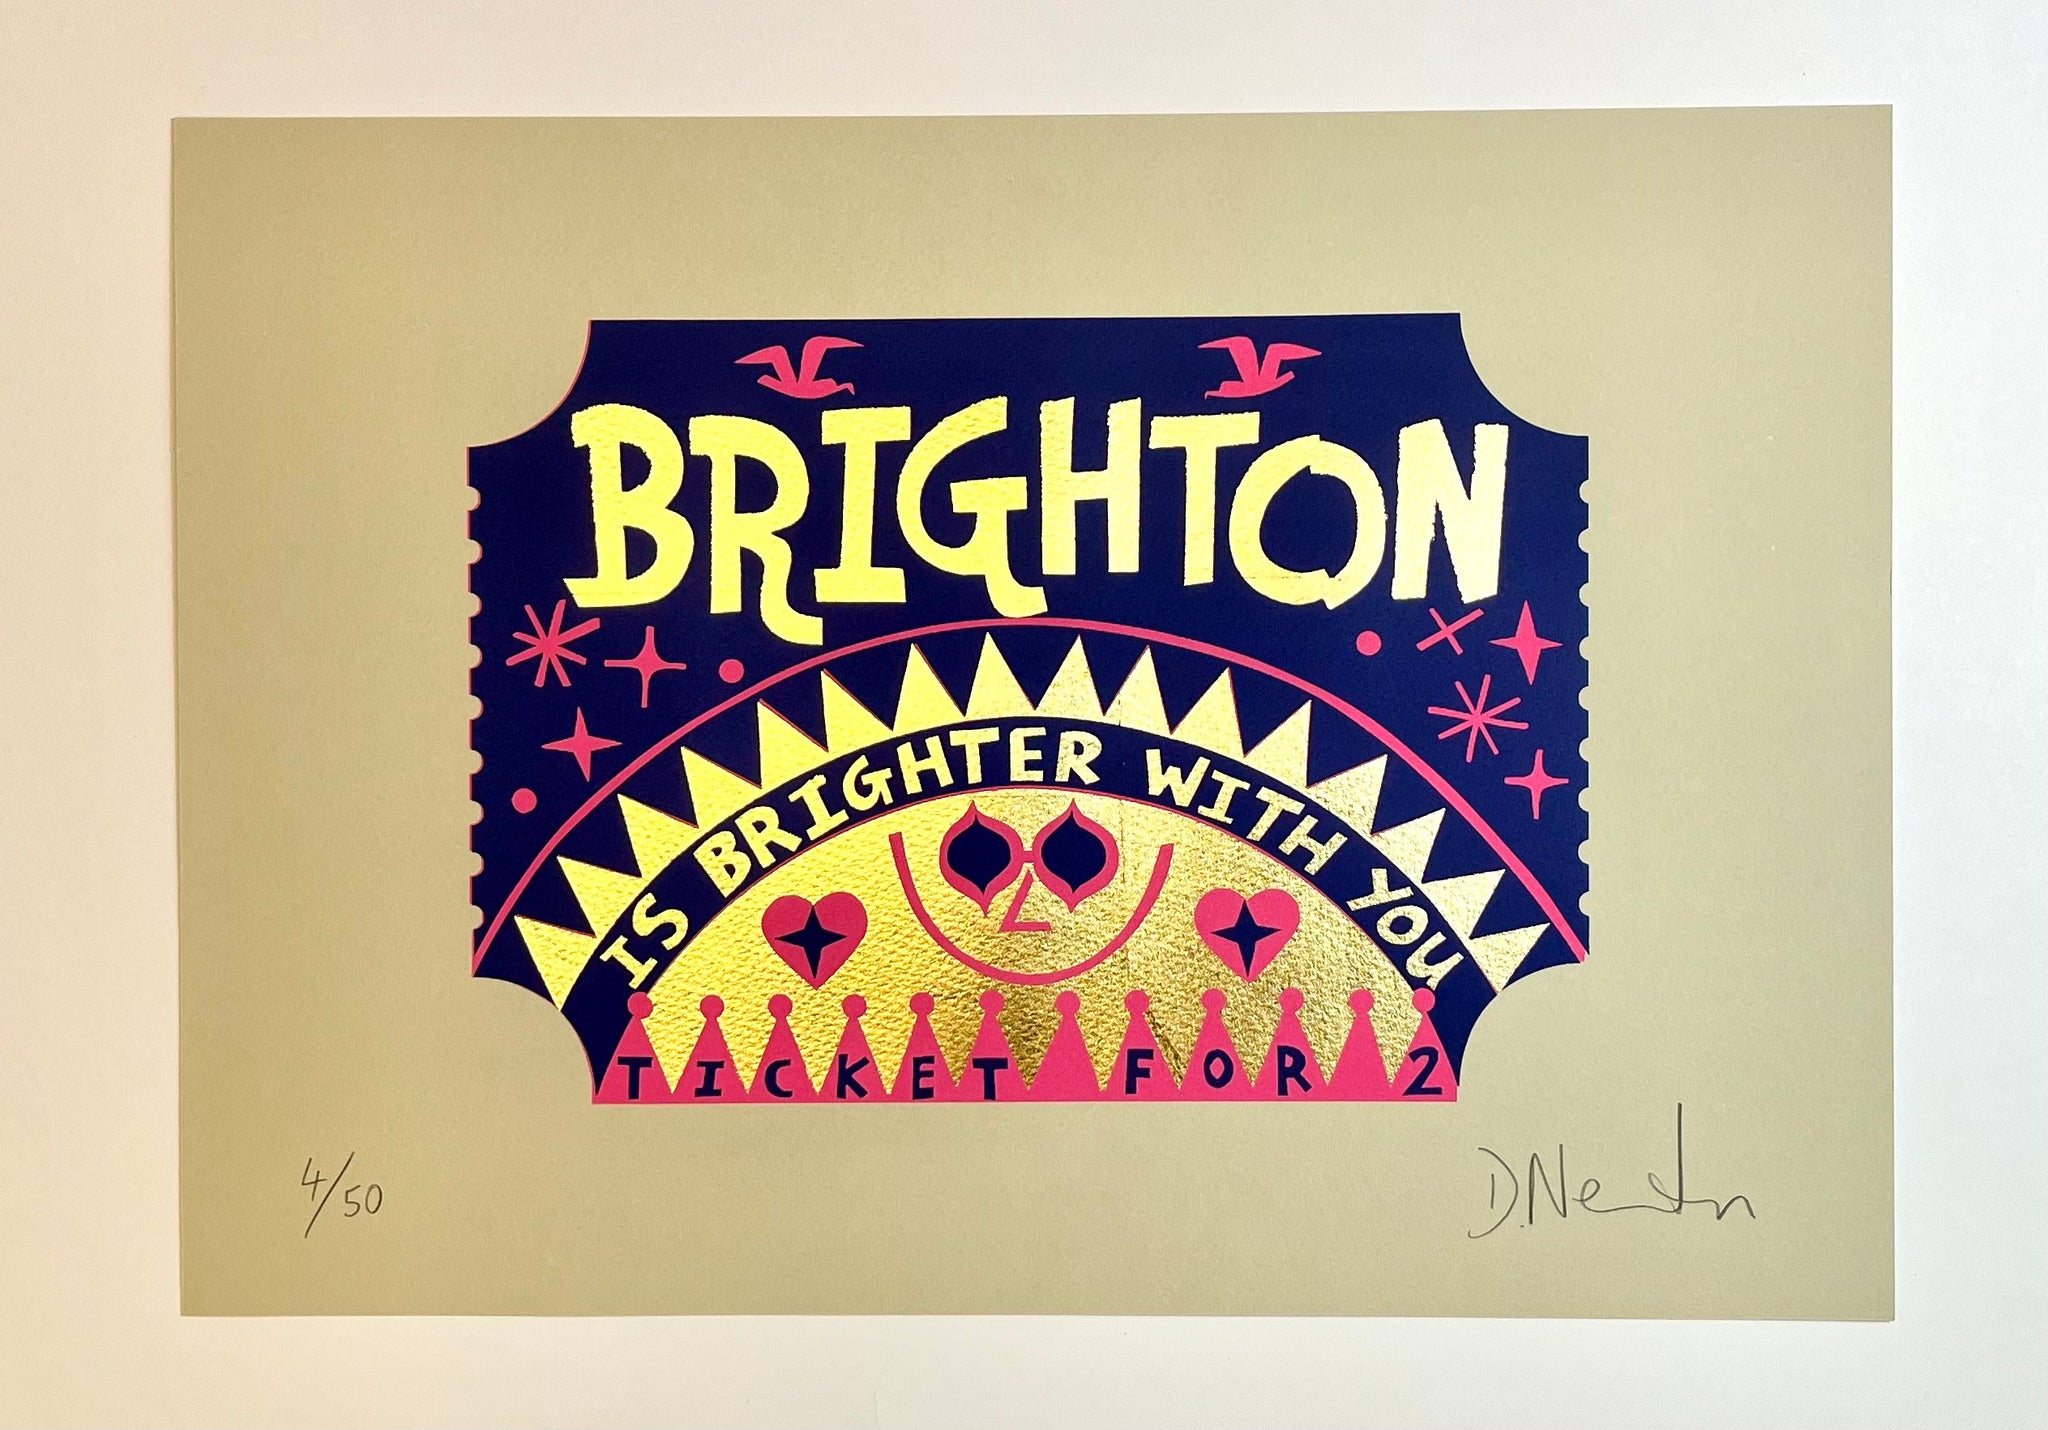 Brighton is brighter with you (pink, purple and gold)